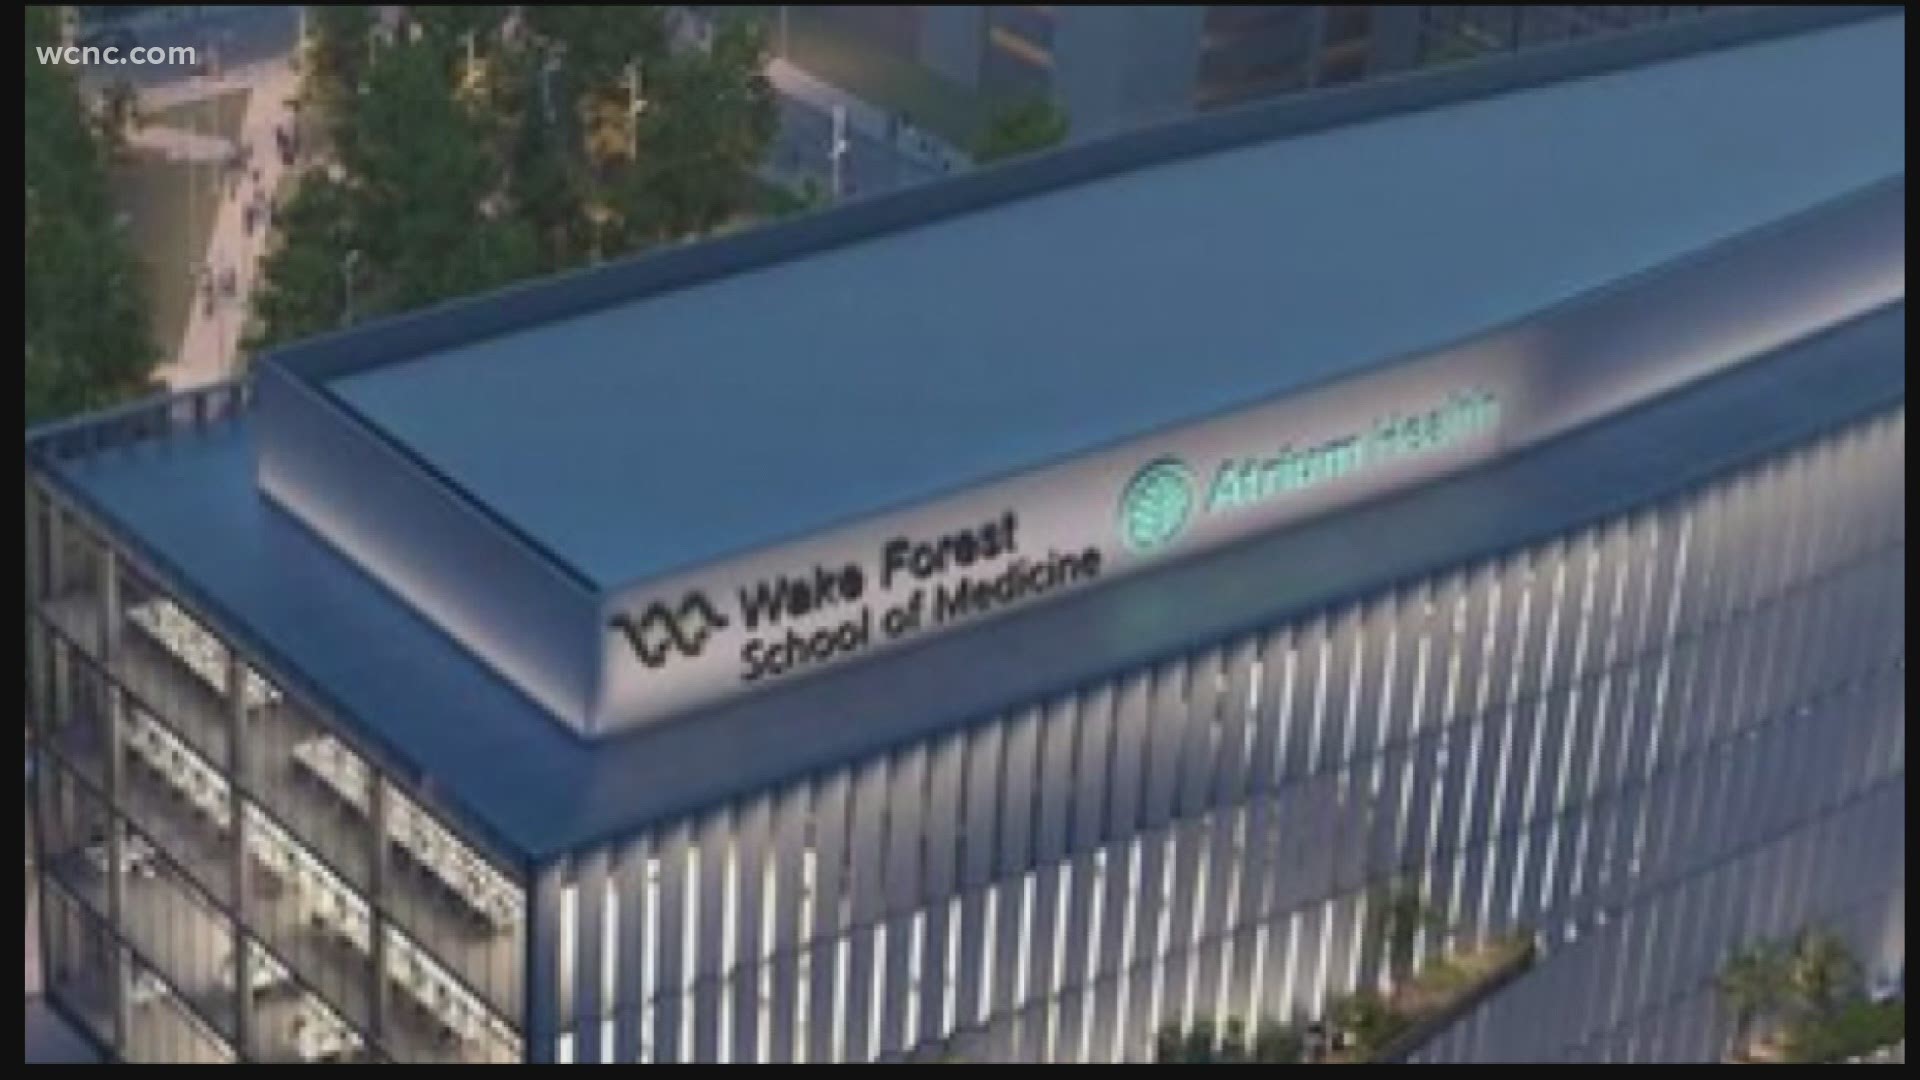 The partnership between Atrium Health and Wake Forest University could create 20,000 jobs by 2040